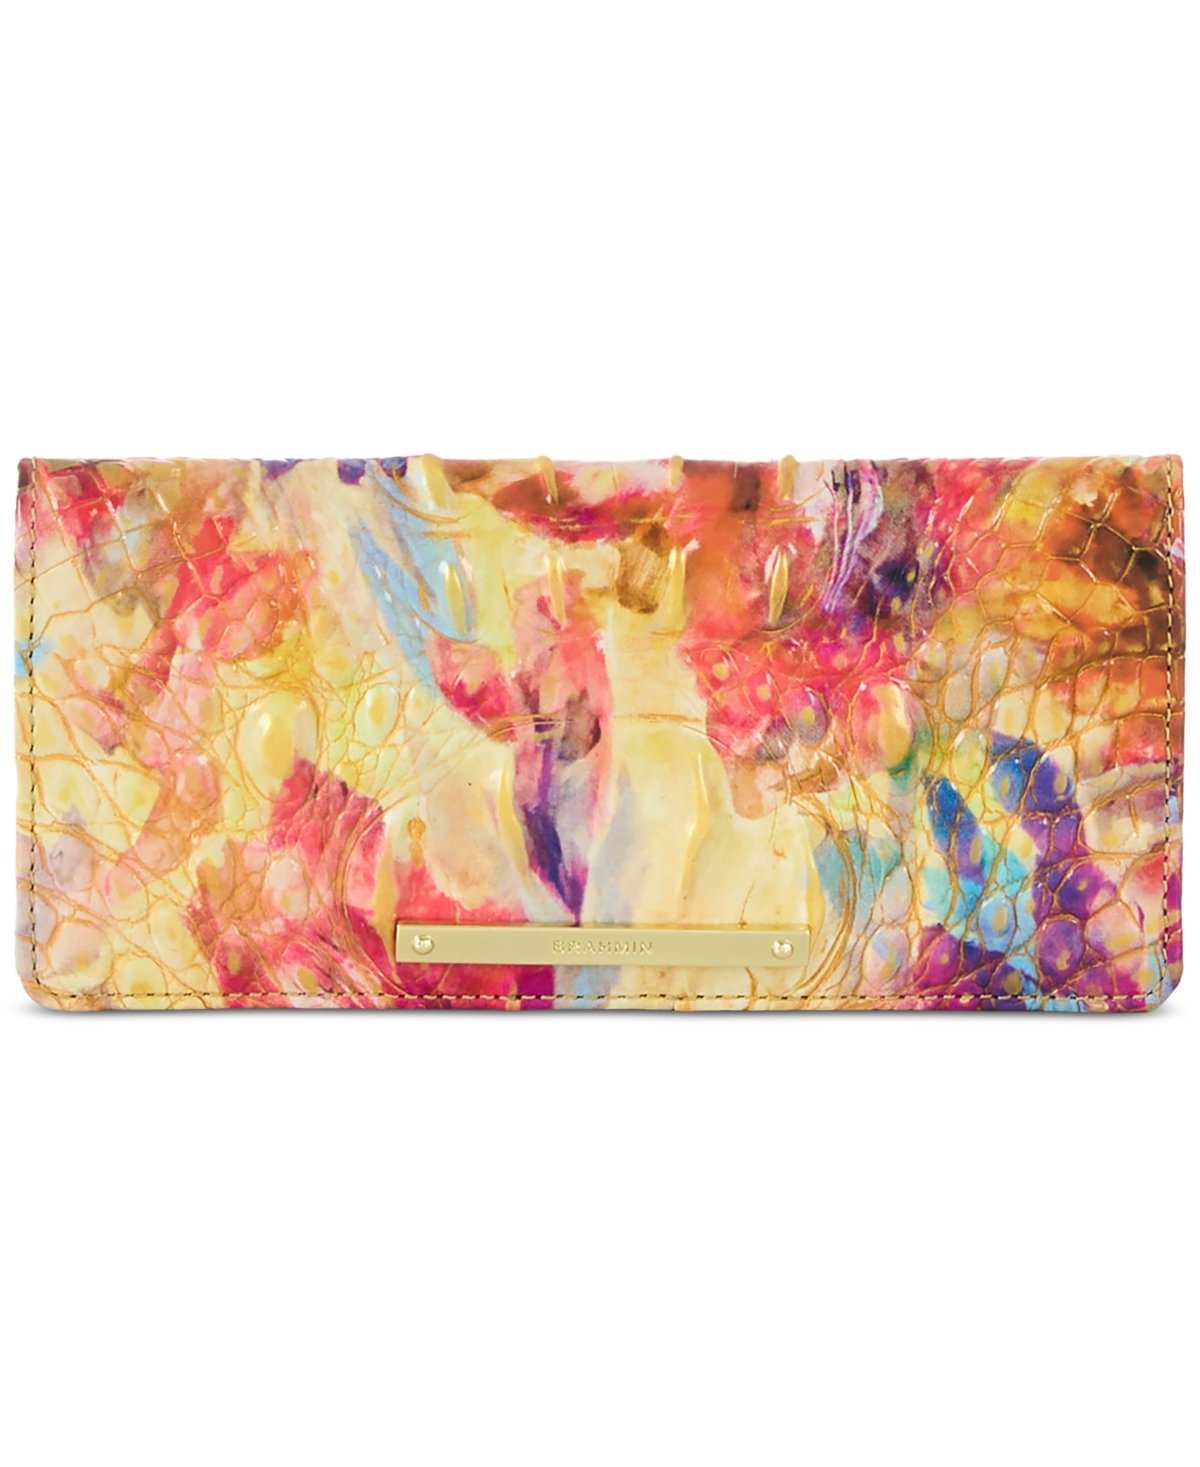 Ady Melbourne Embossed Leather Wallet - Happy Hour